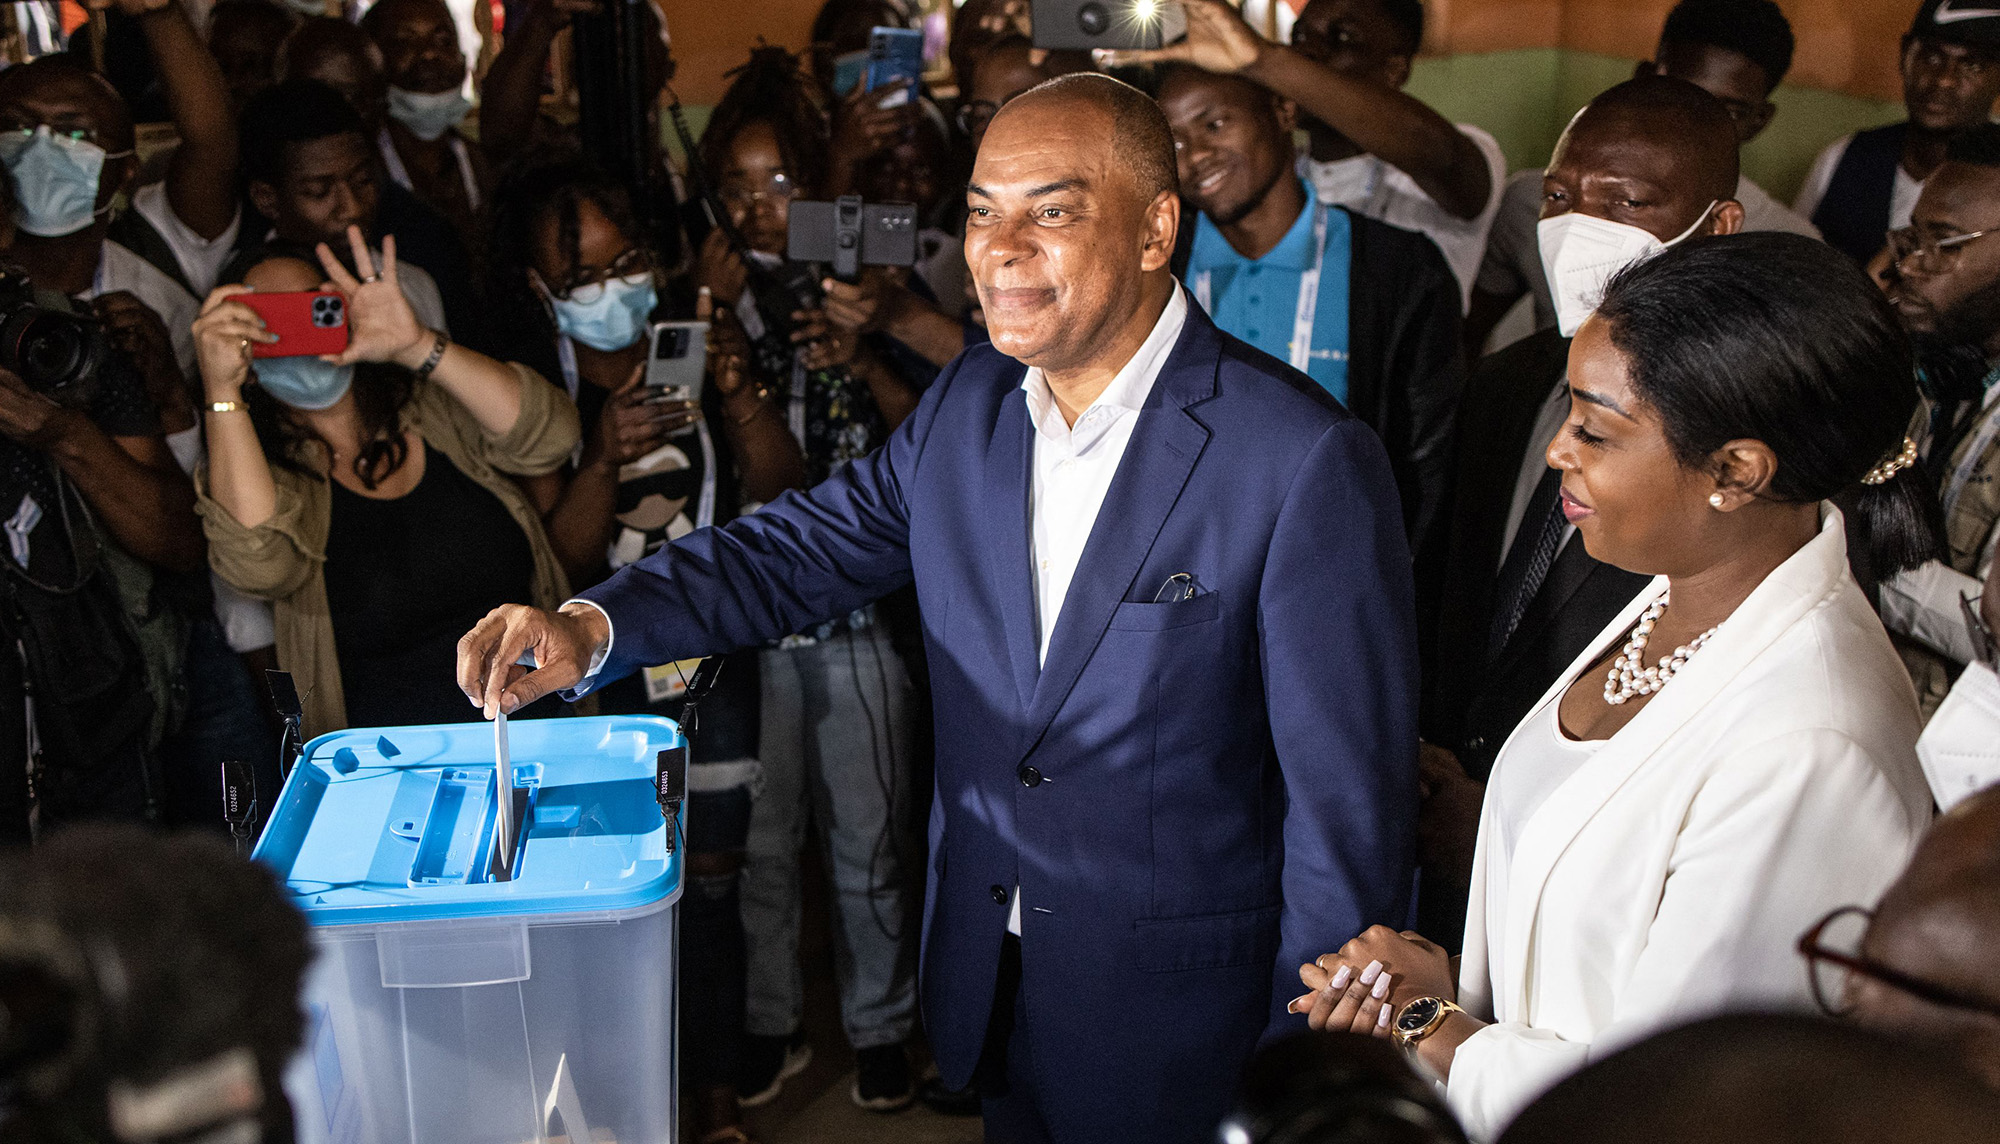 Angola’s main opposition party challenges election results